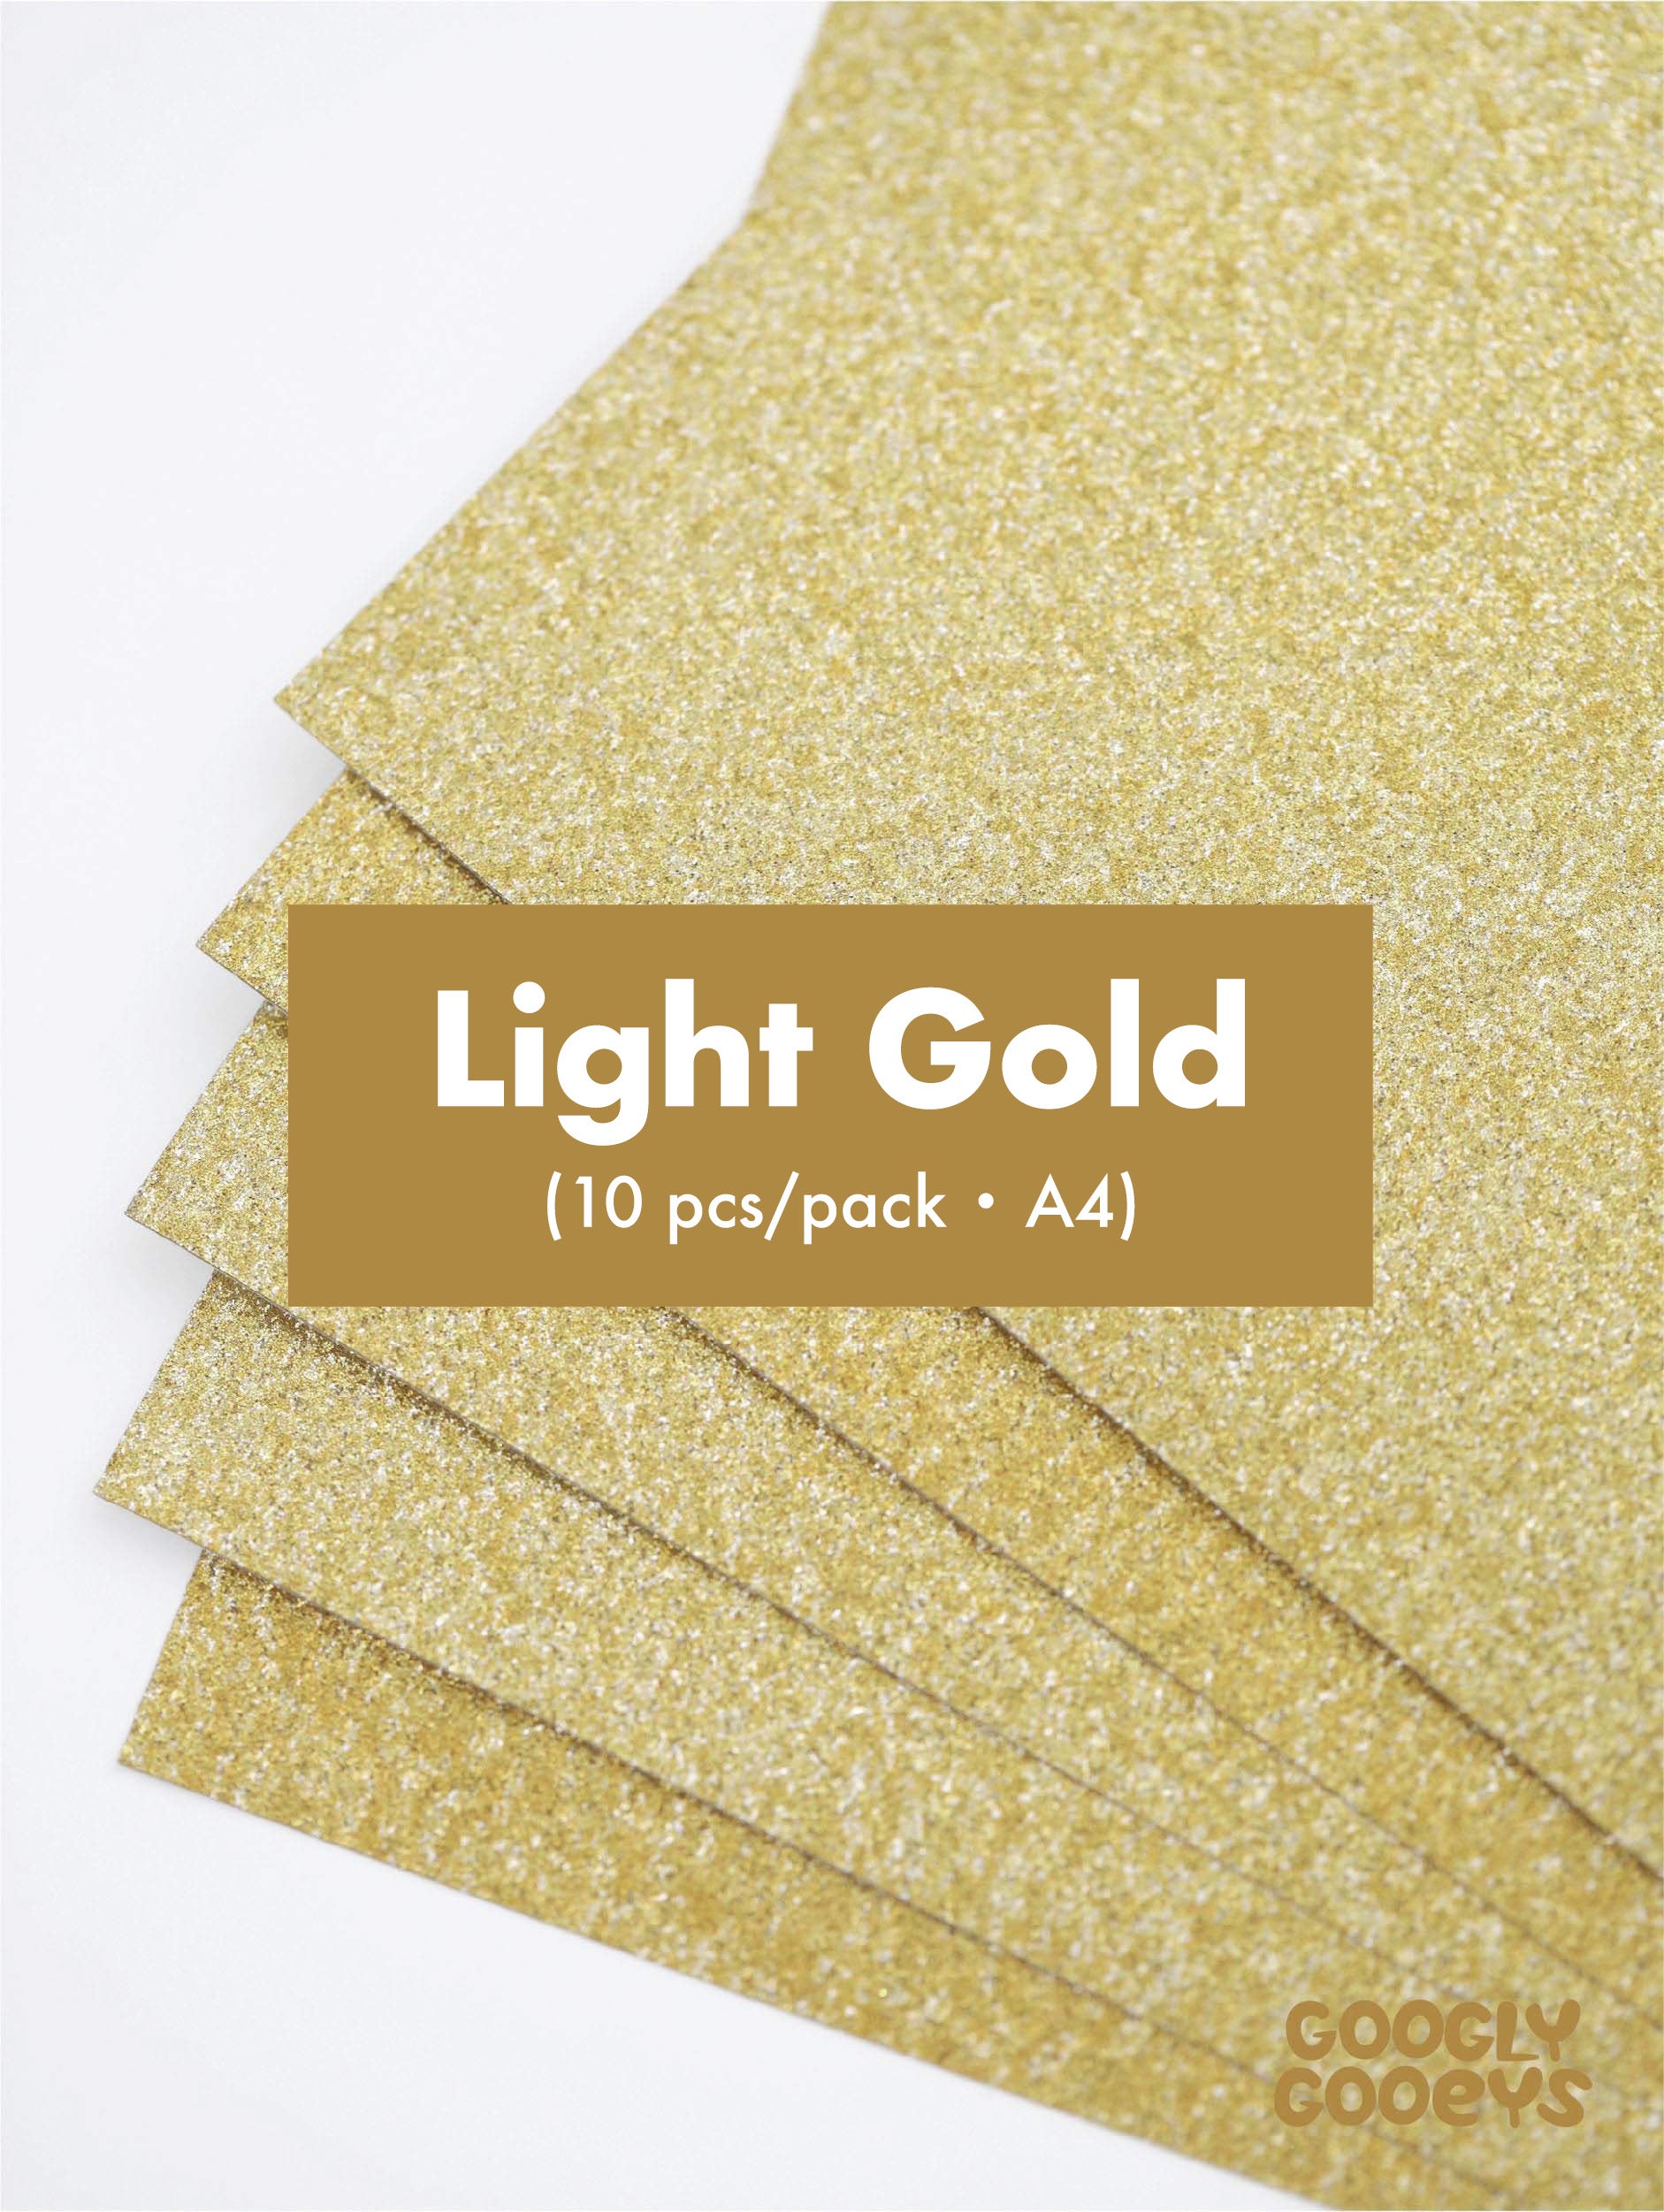 Googly Gooeys Glitter Cardstock for Crafting Projects | 200-250gsm (A4)